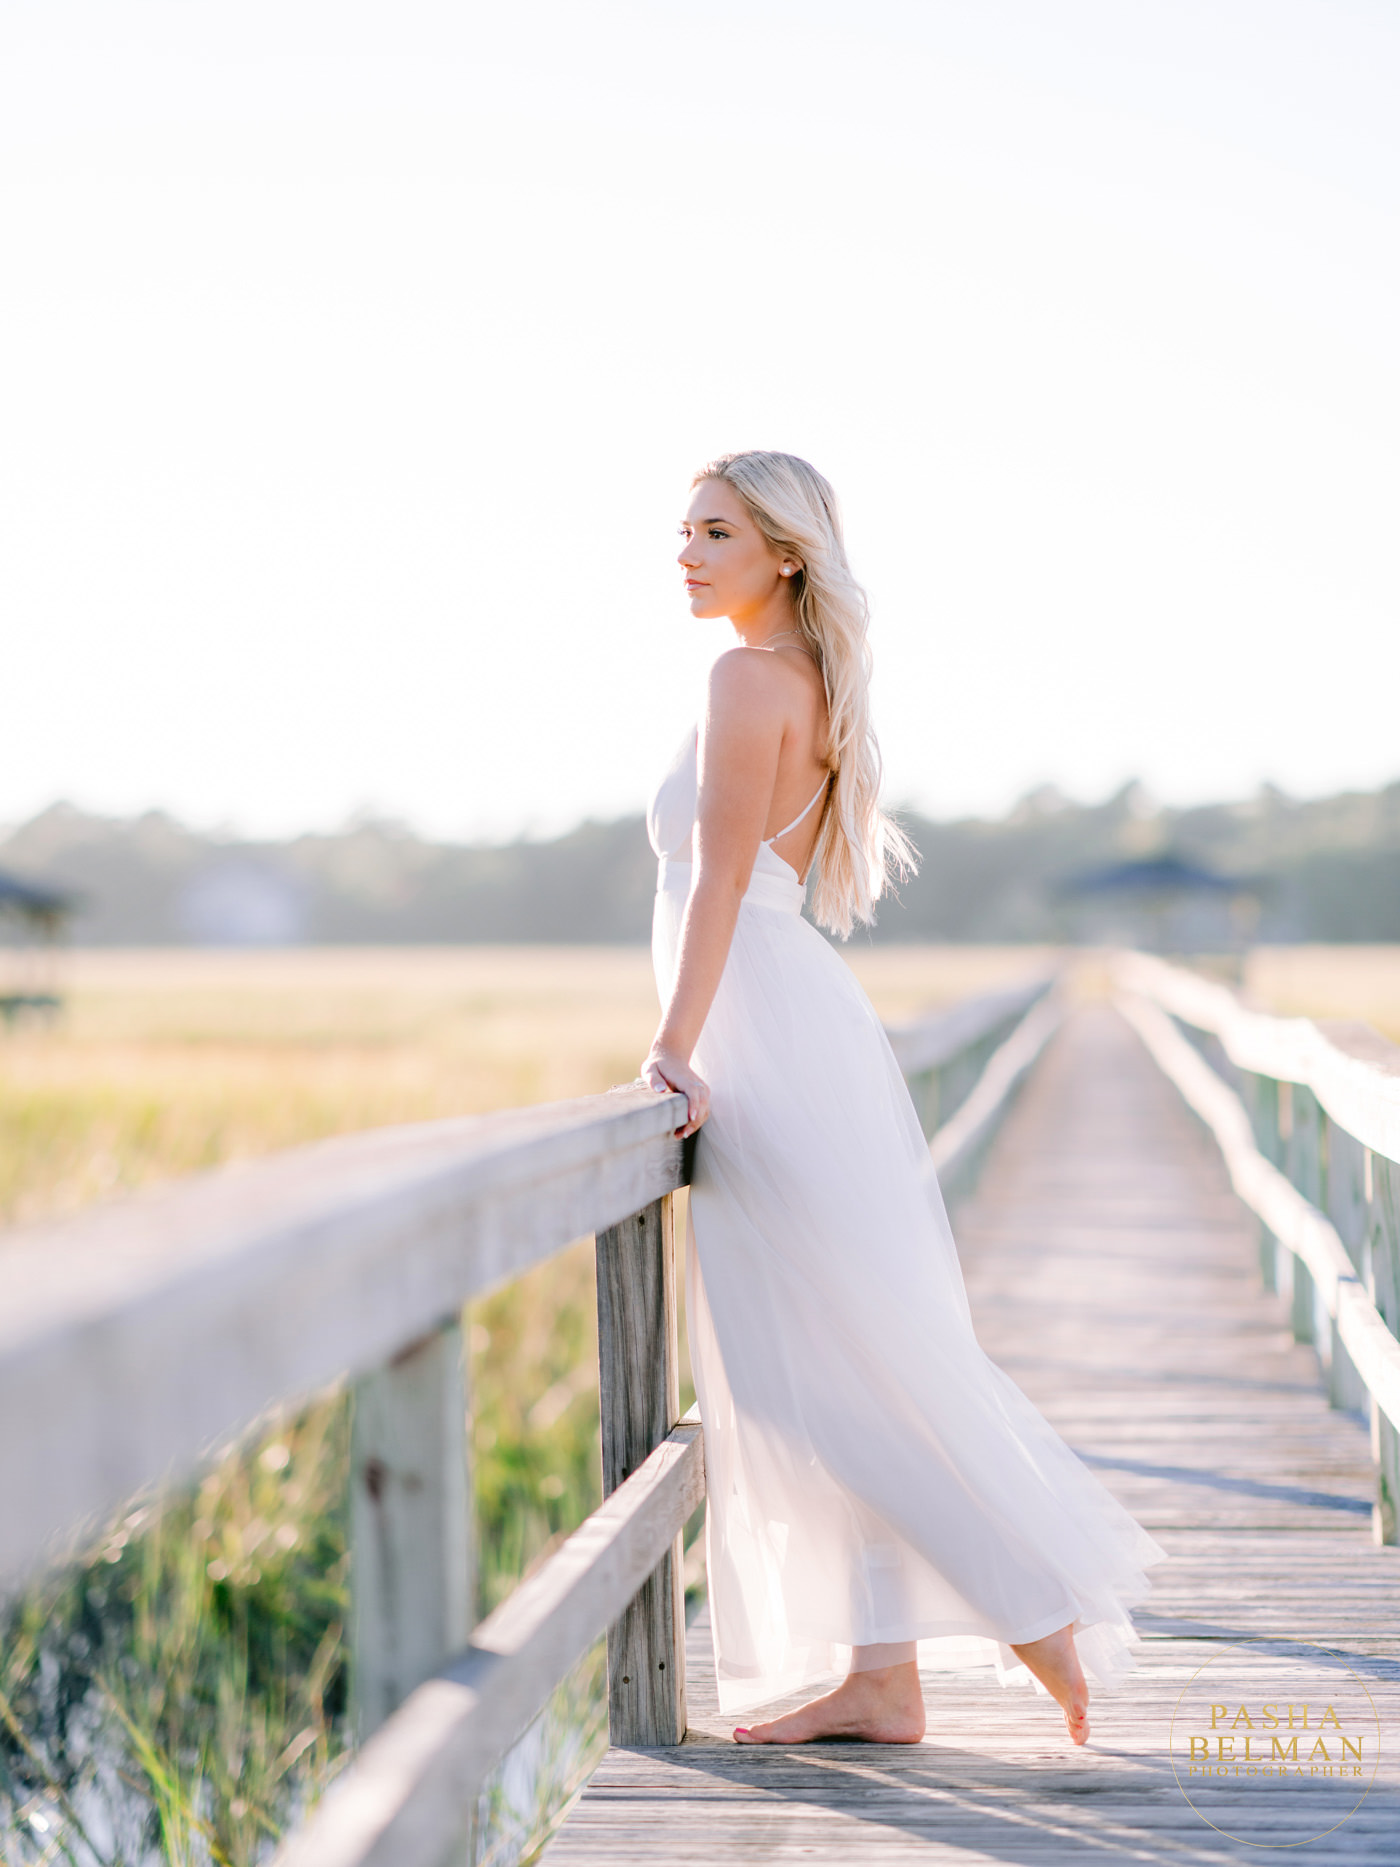 The Best Pawleys Island Senior Pictures by Pasha Belman